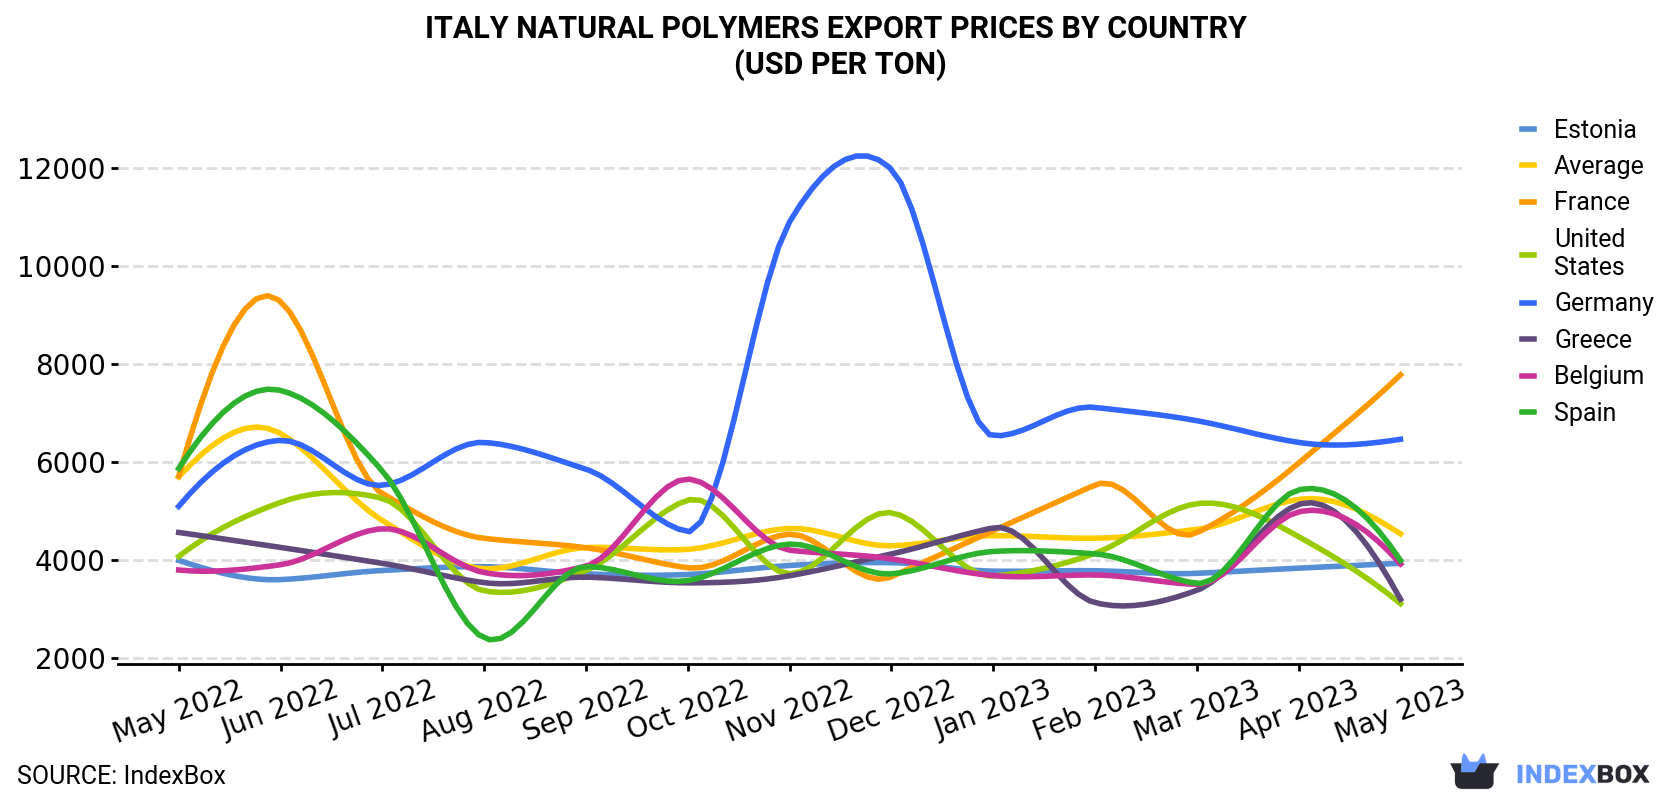 Italy Natural Polymers Export Prices By Country (USD Per Ton)